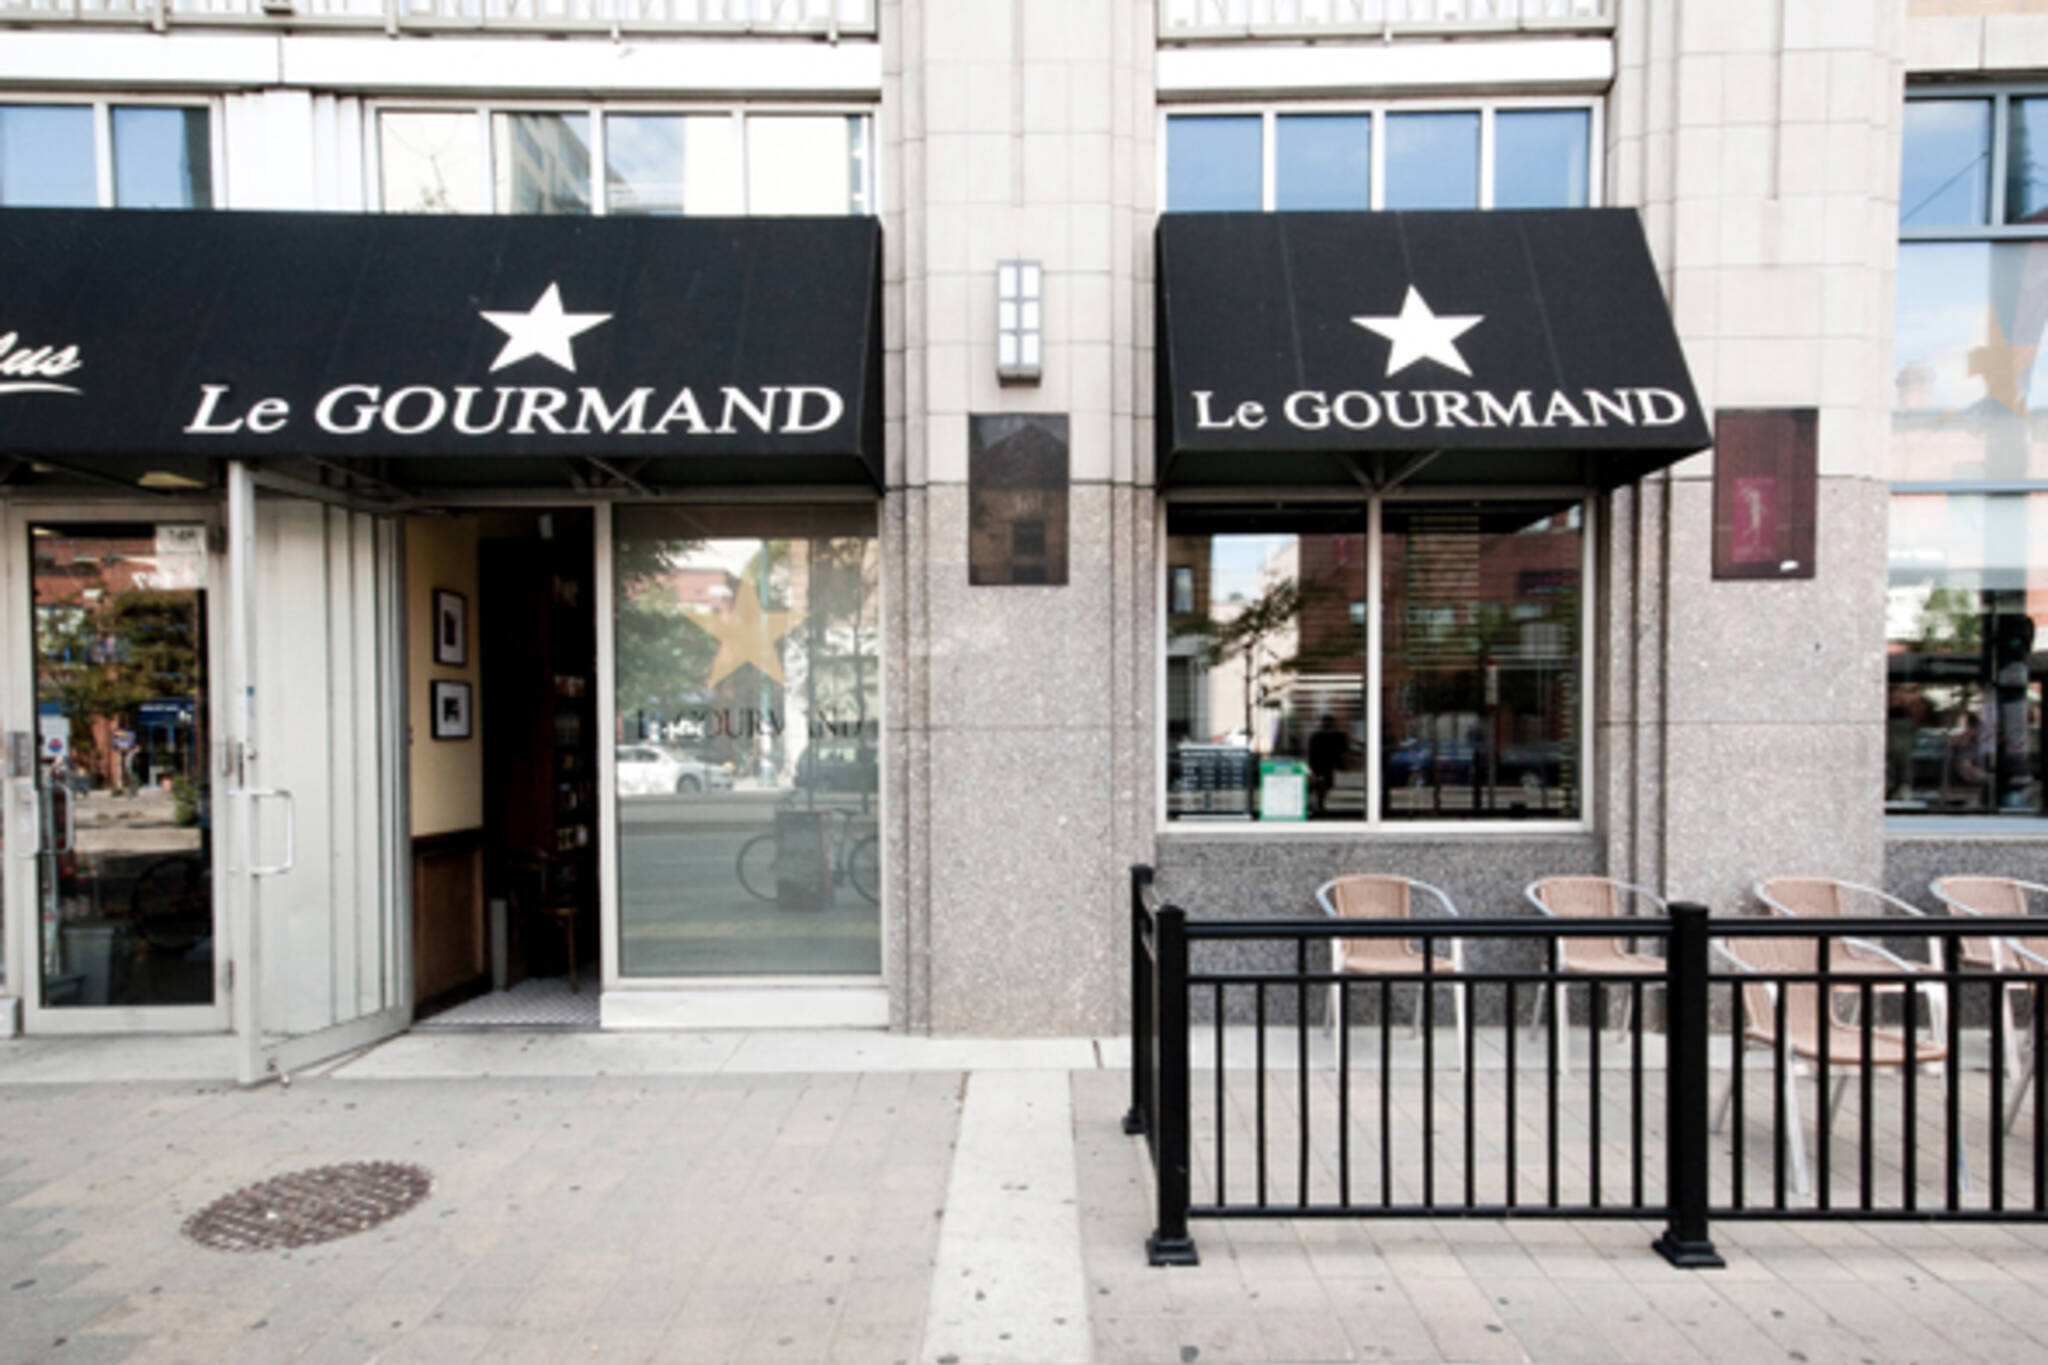 Le Gourmand reopens